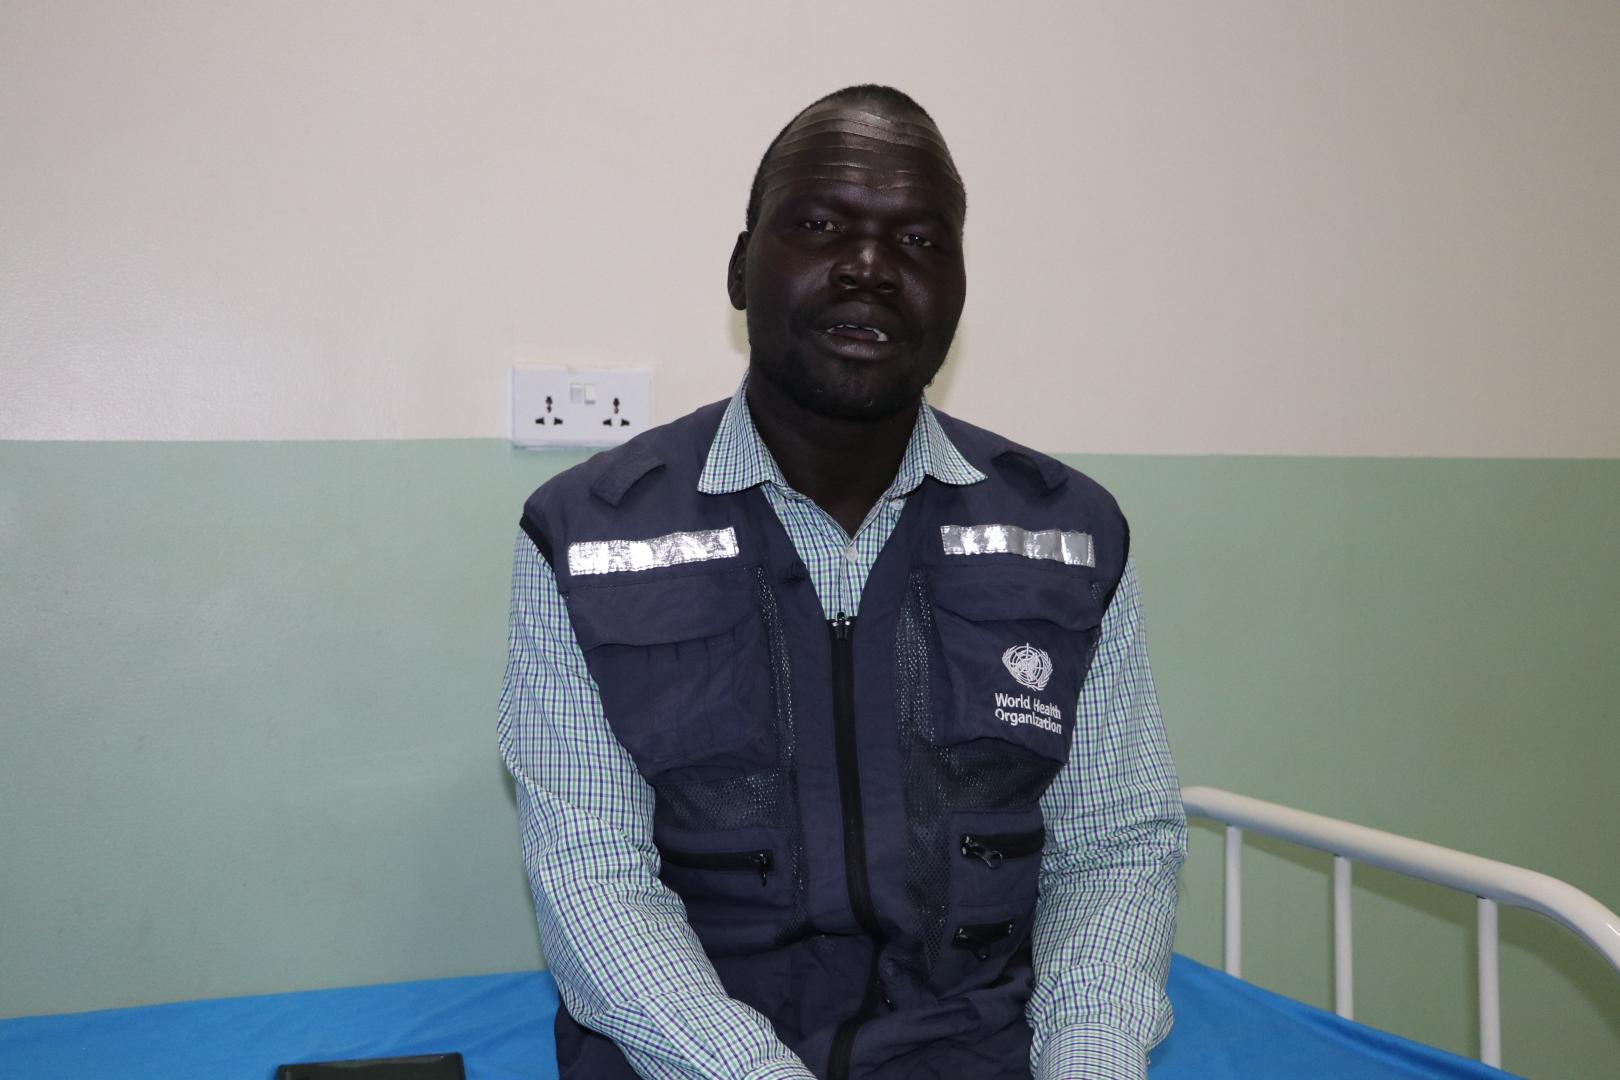 Gabriel Chuong the fearless healthcare warriors of the WHO are relentlessly delivering medical aid to isolated communities in the challenging terrain of South Sudan